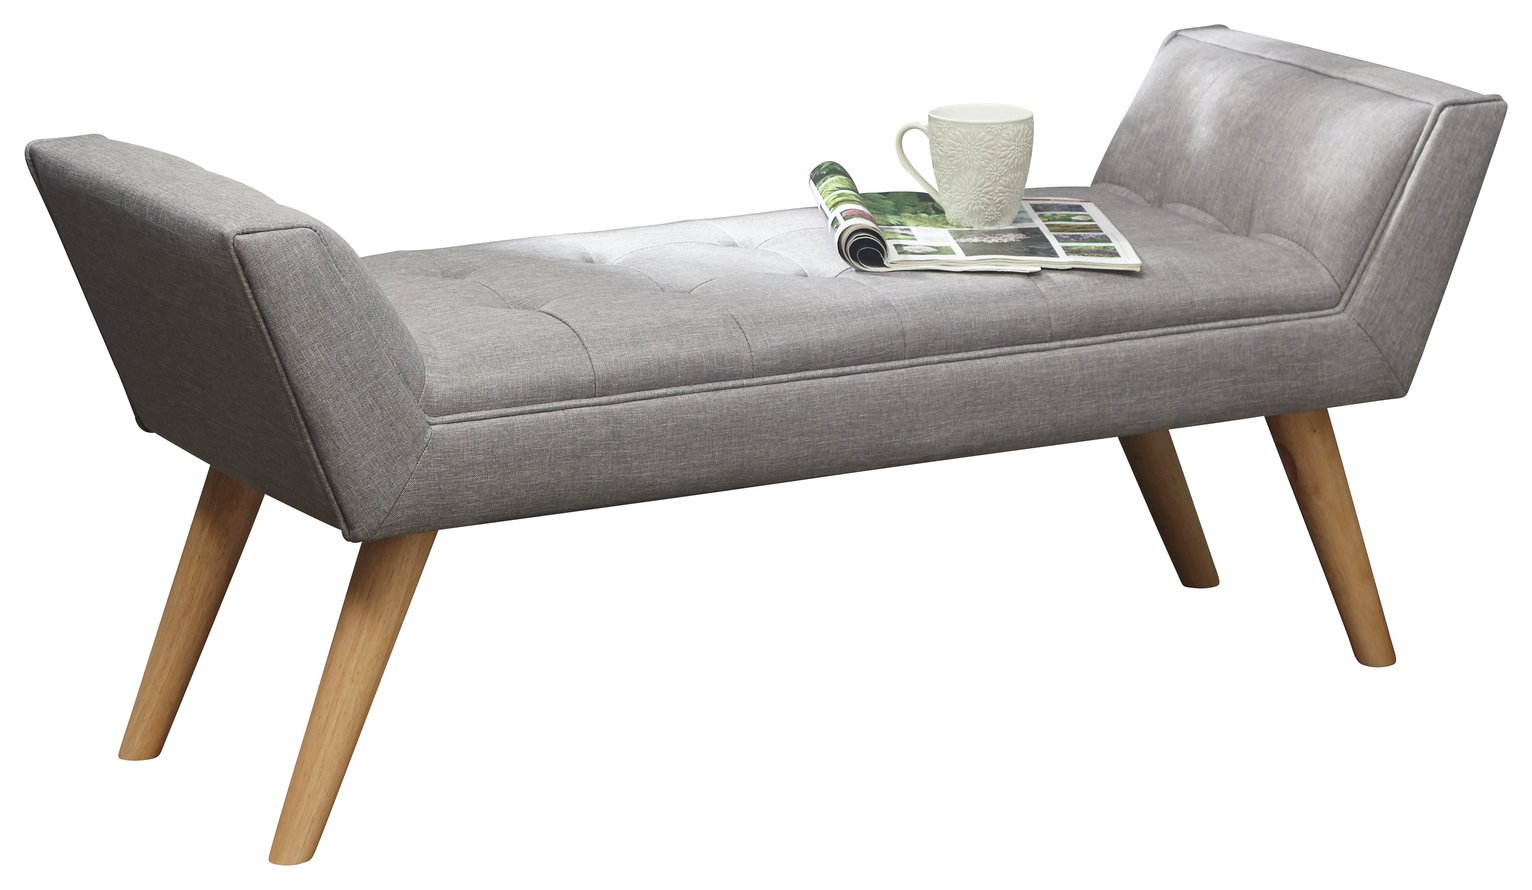 GFW Milan Fabric Upholstered Bench - Grey